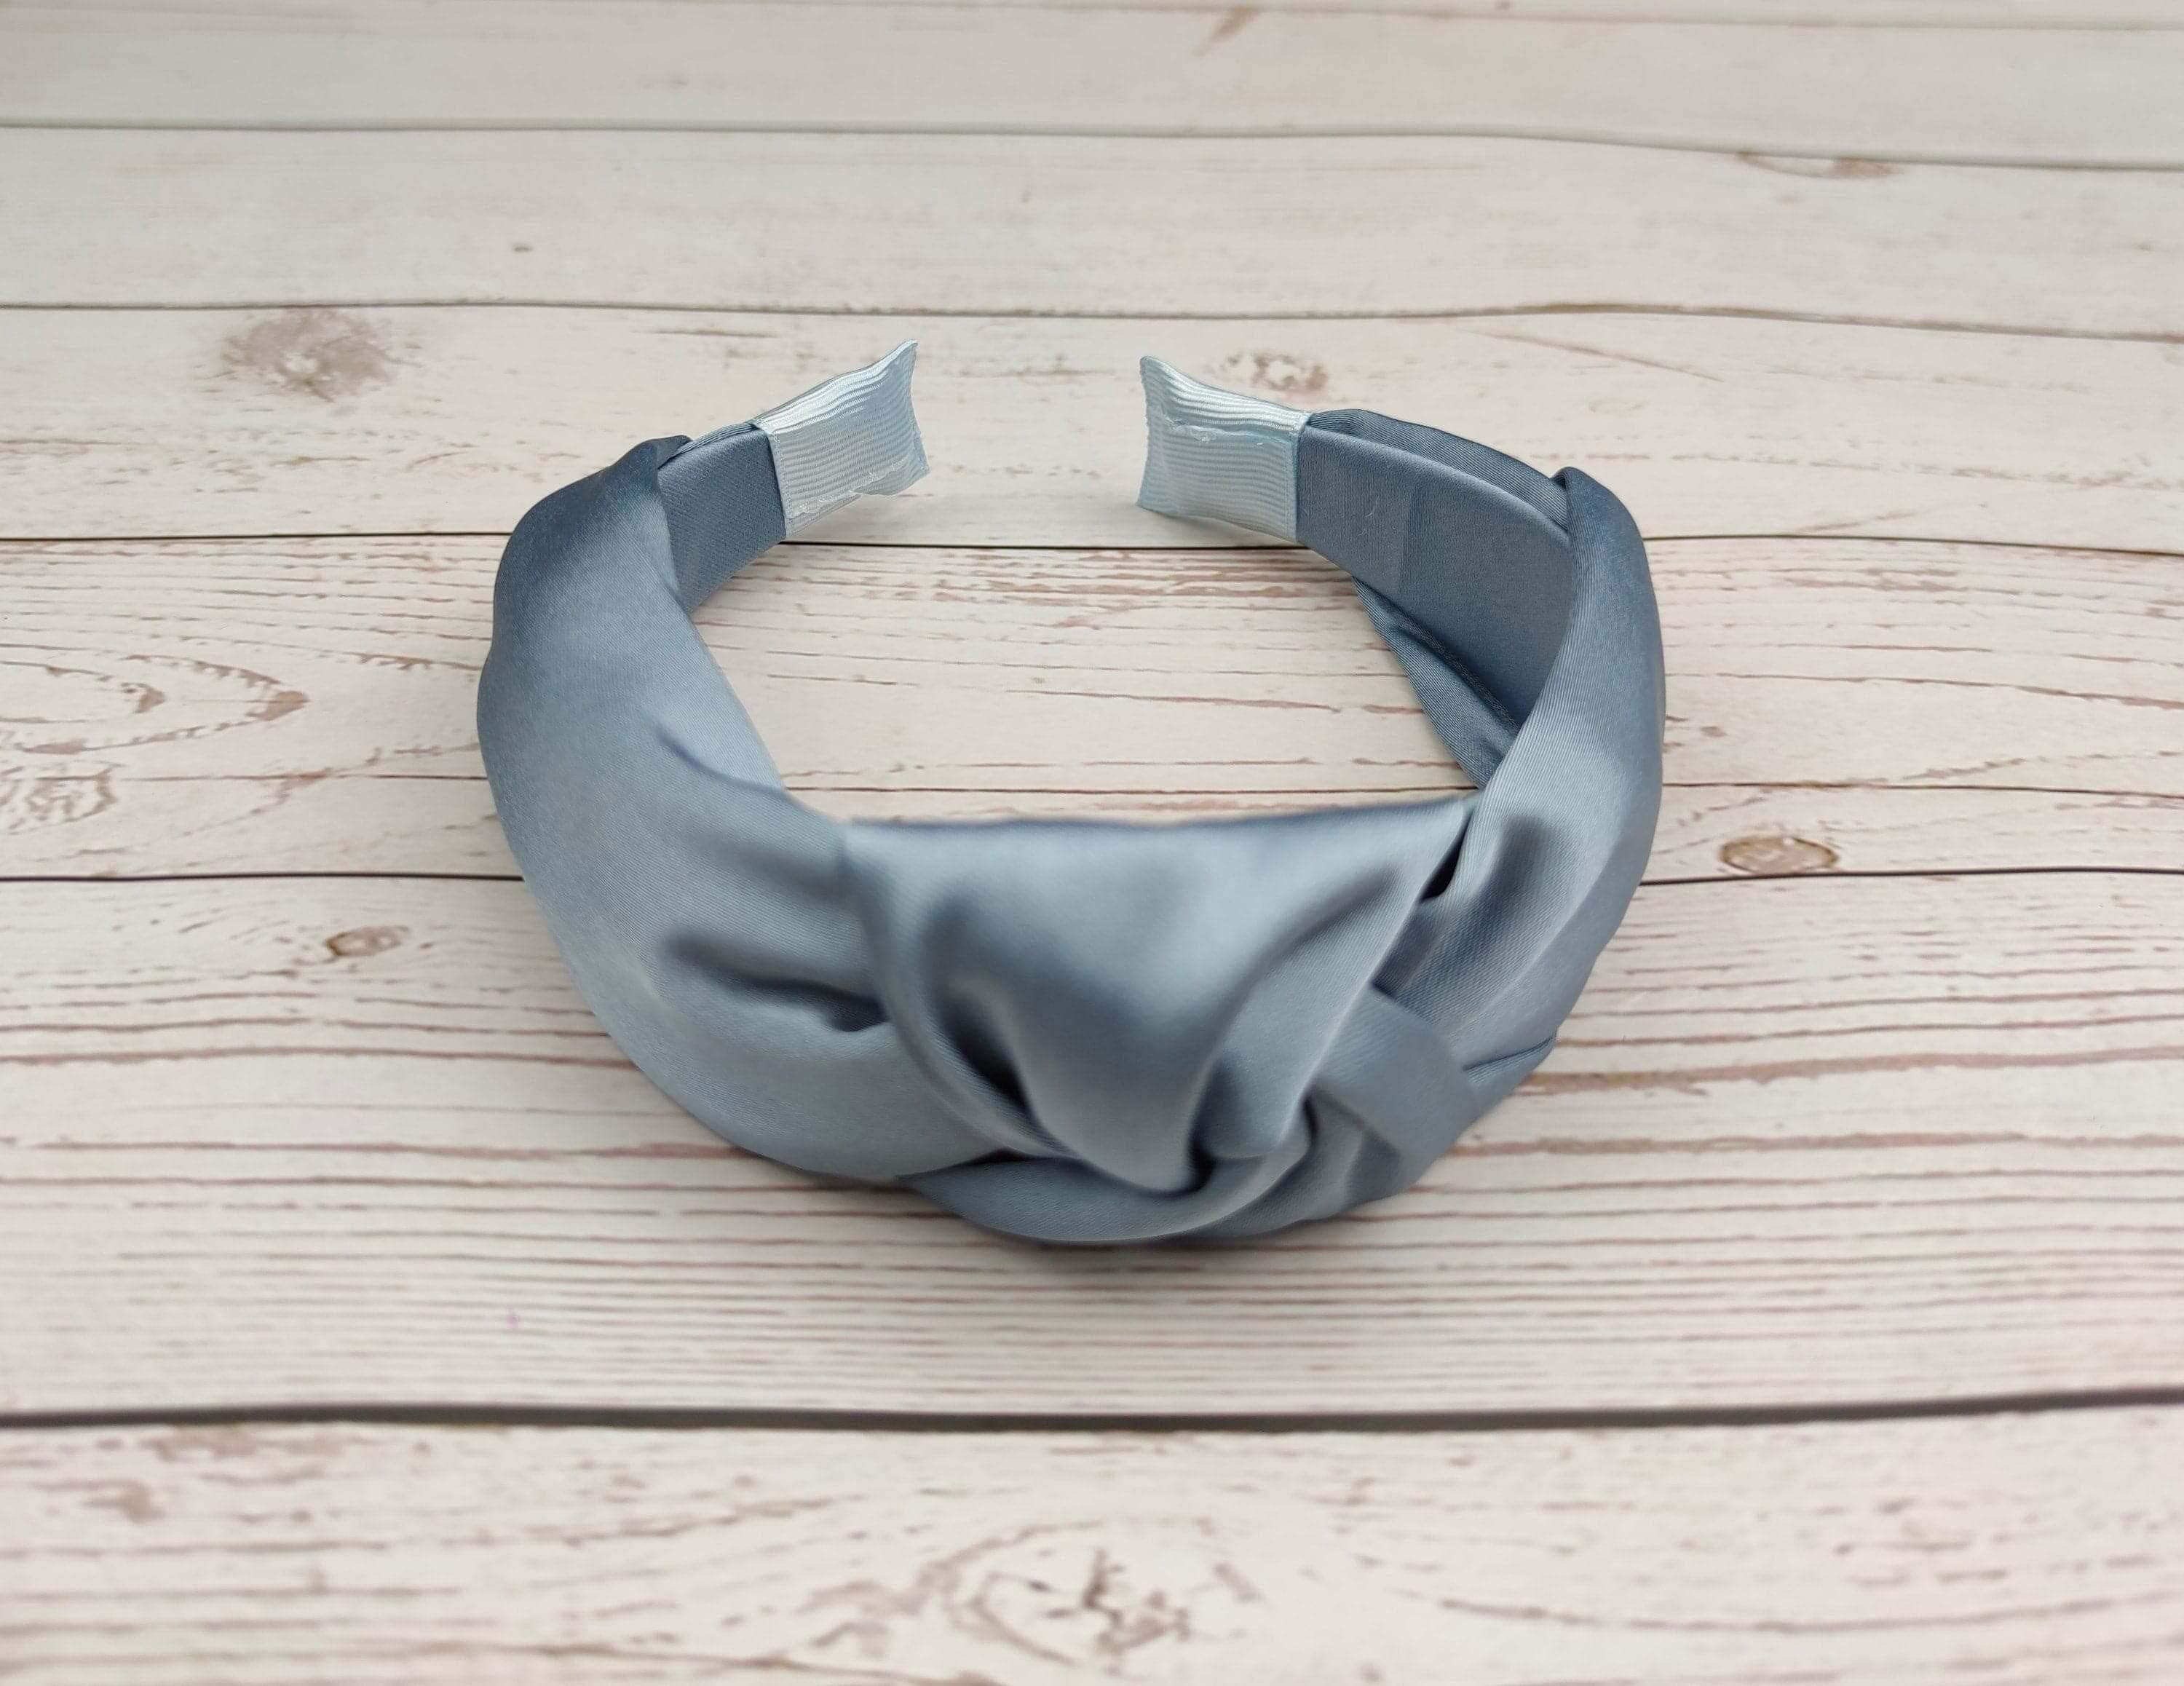 Stay comfortable and stylish with this light blue headband, designed with a knot twist and made from satin material.